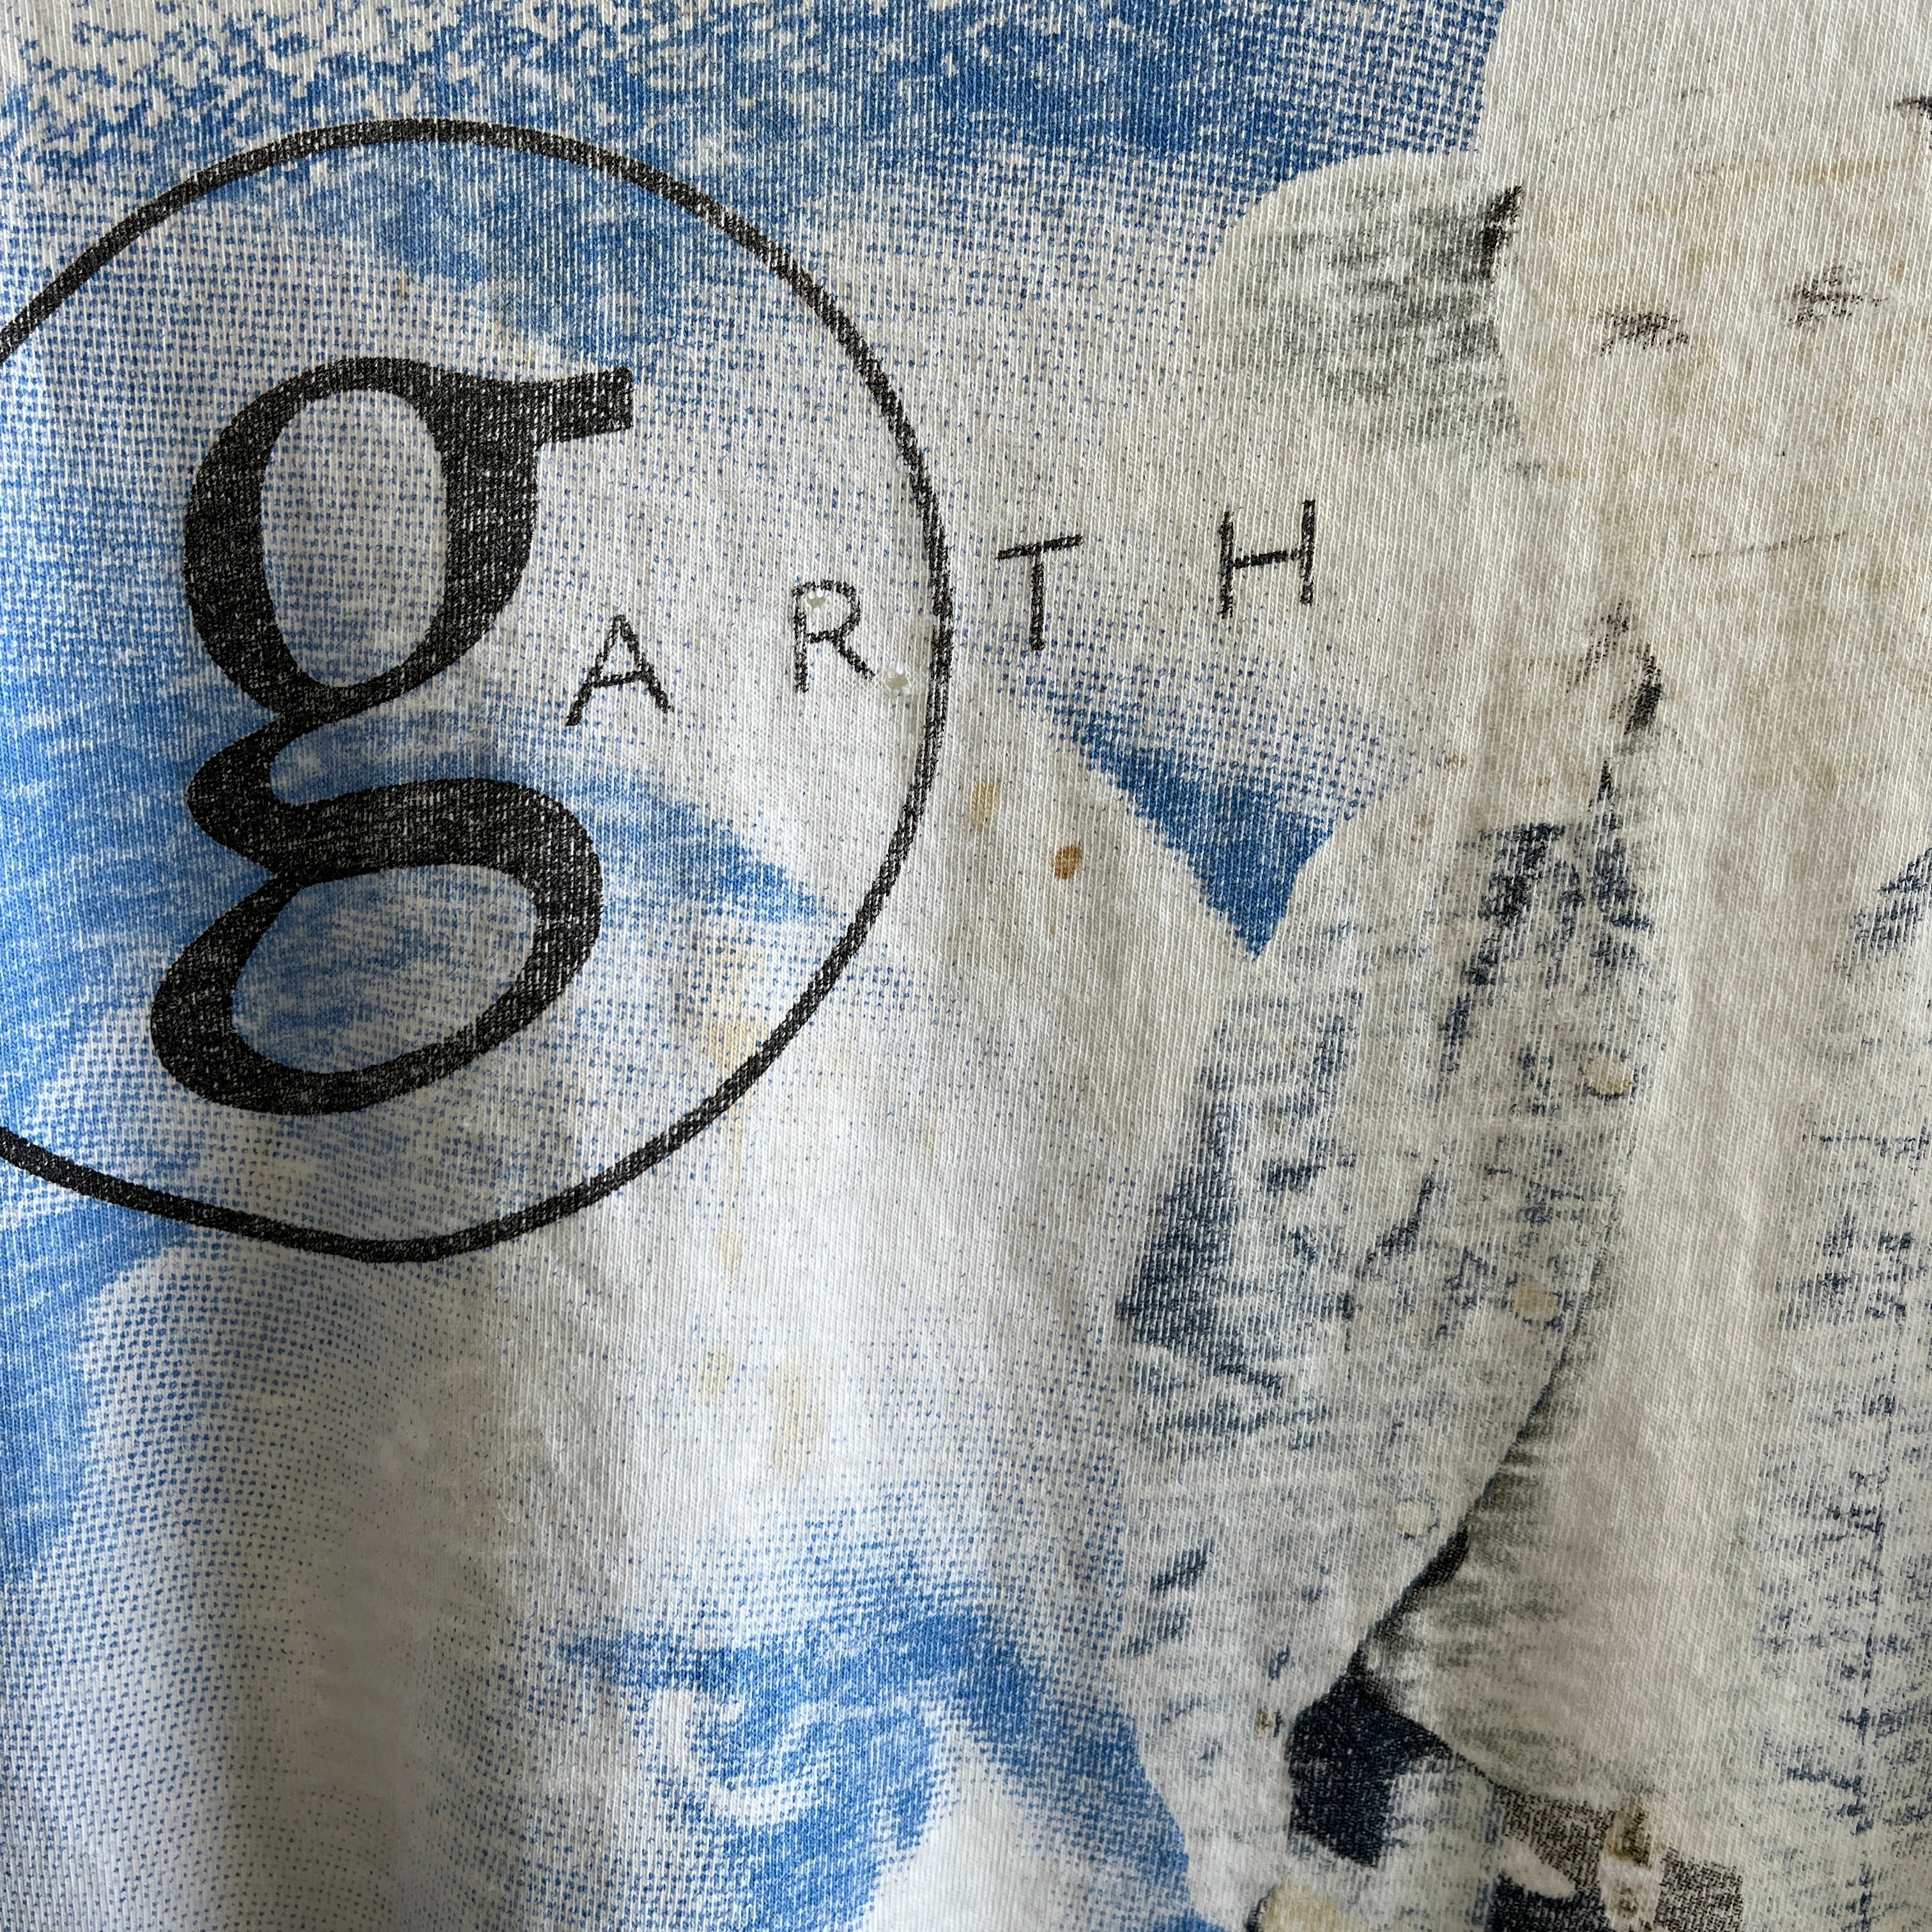 1990s Completely Thrashed in The Best Way Garth Brooks Music T-SHirt - Thin, Holes, Stains.